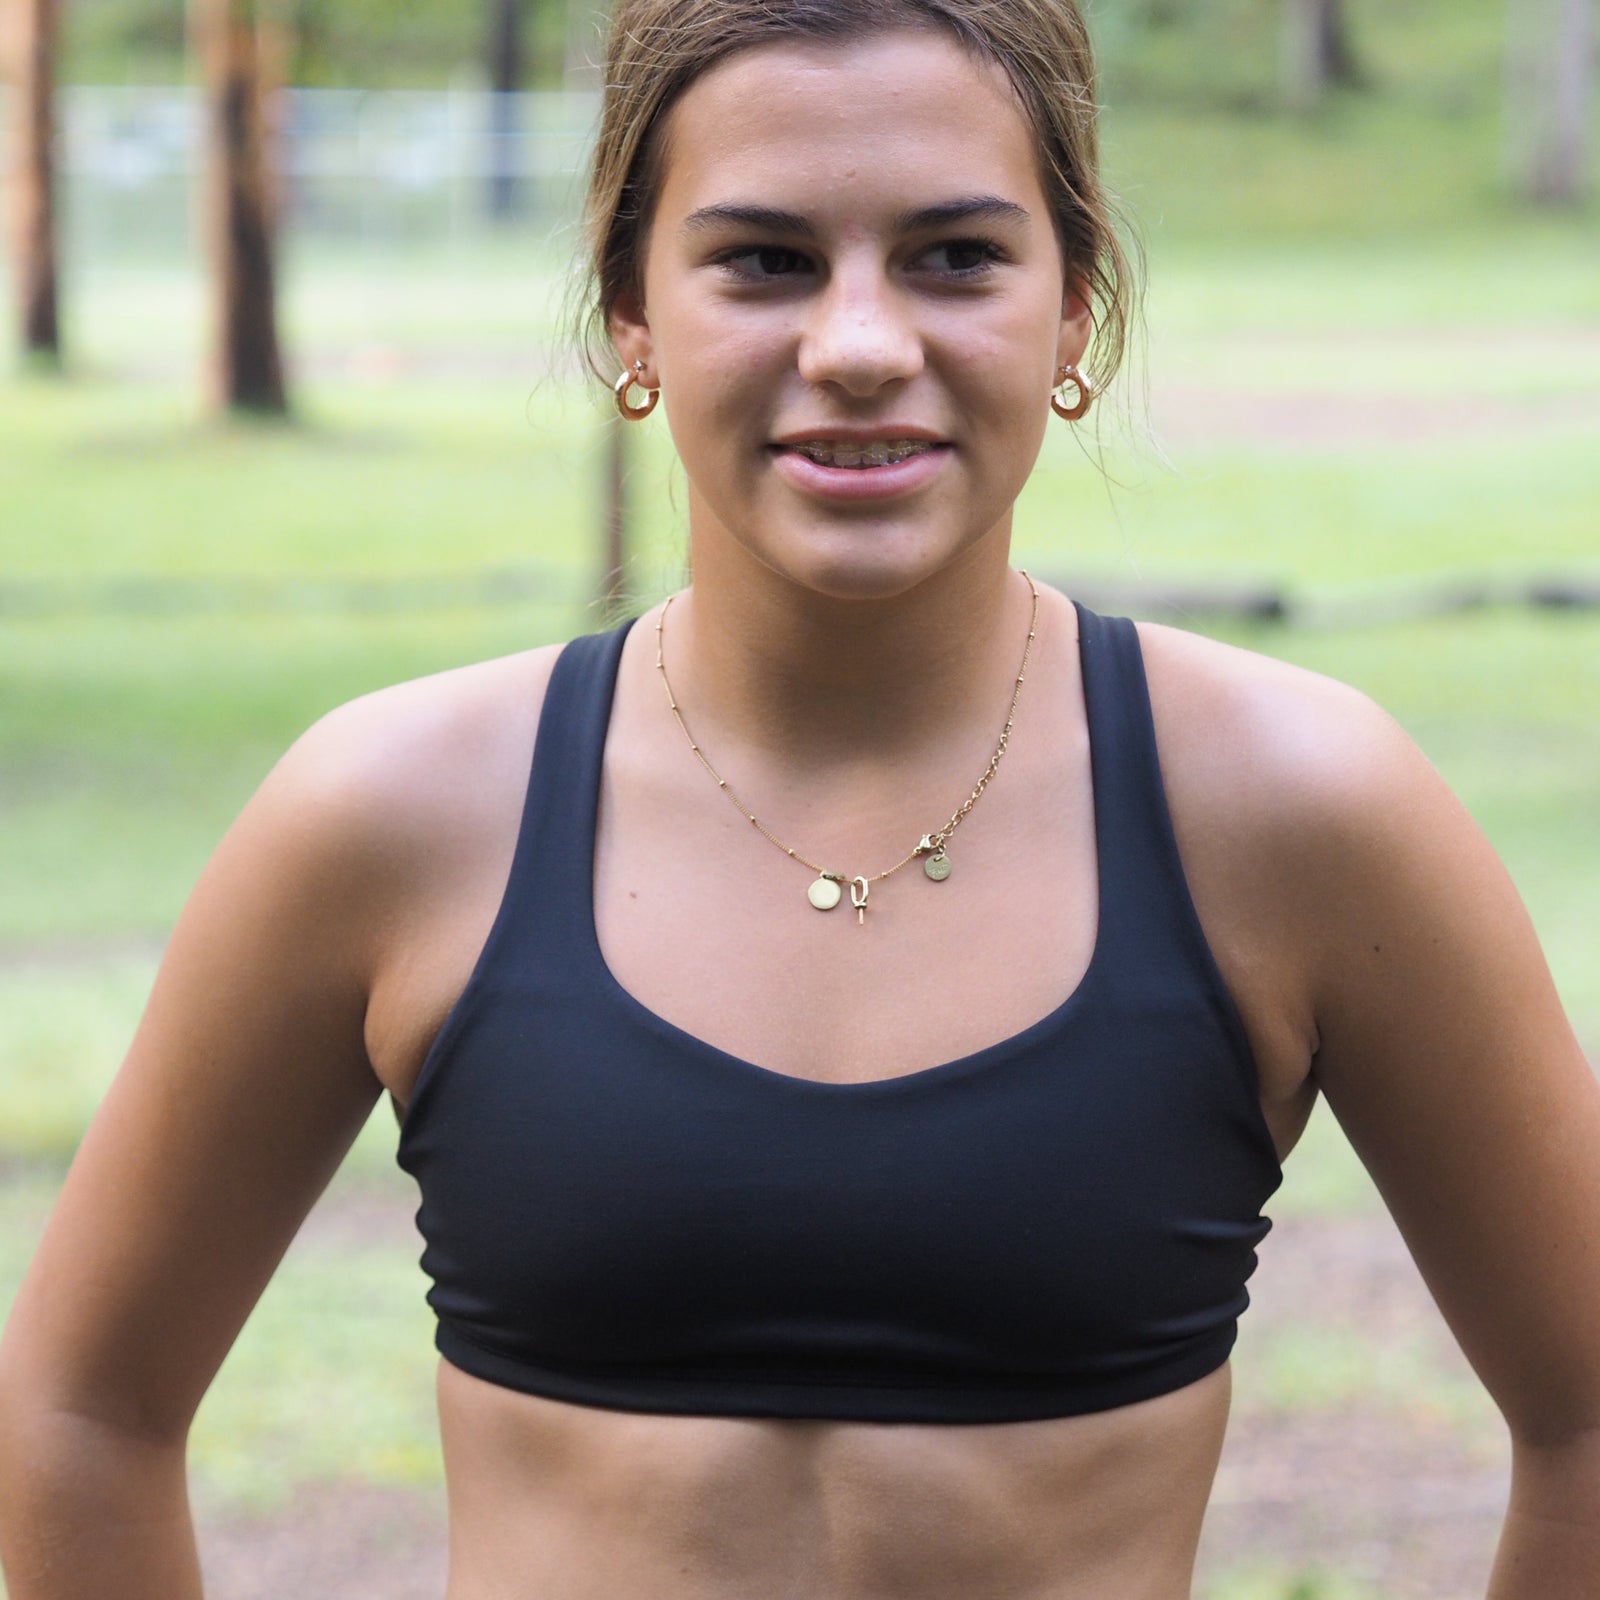 Set The Track Ablaze Tagged running bras for young girls - Impi Sportswear